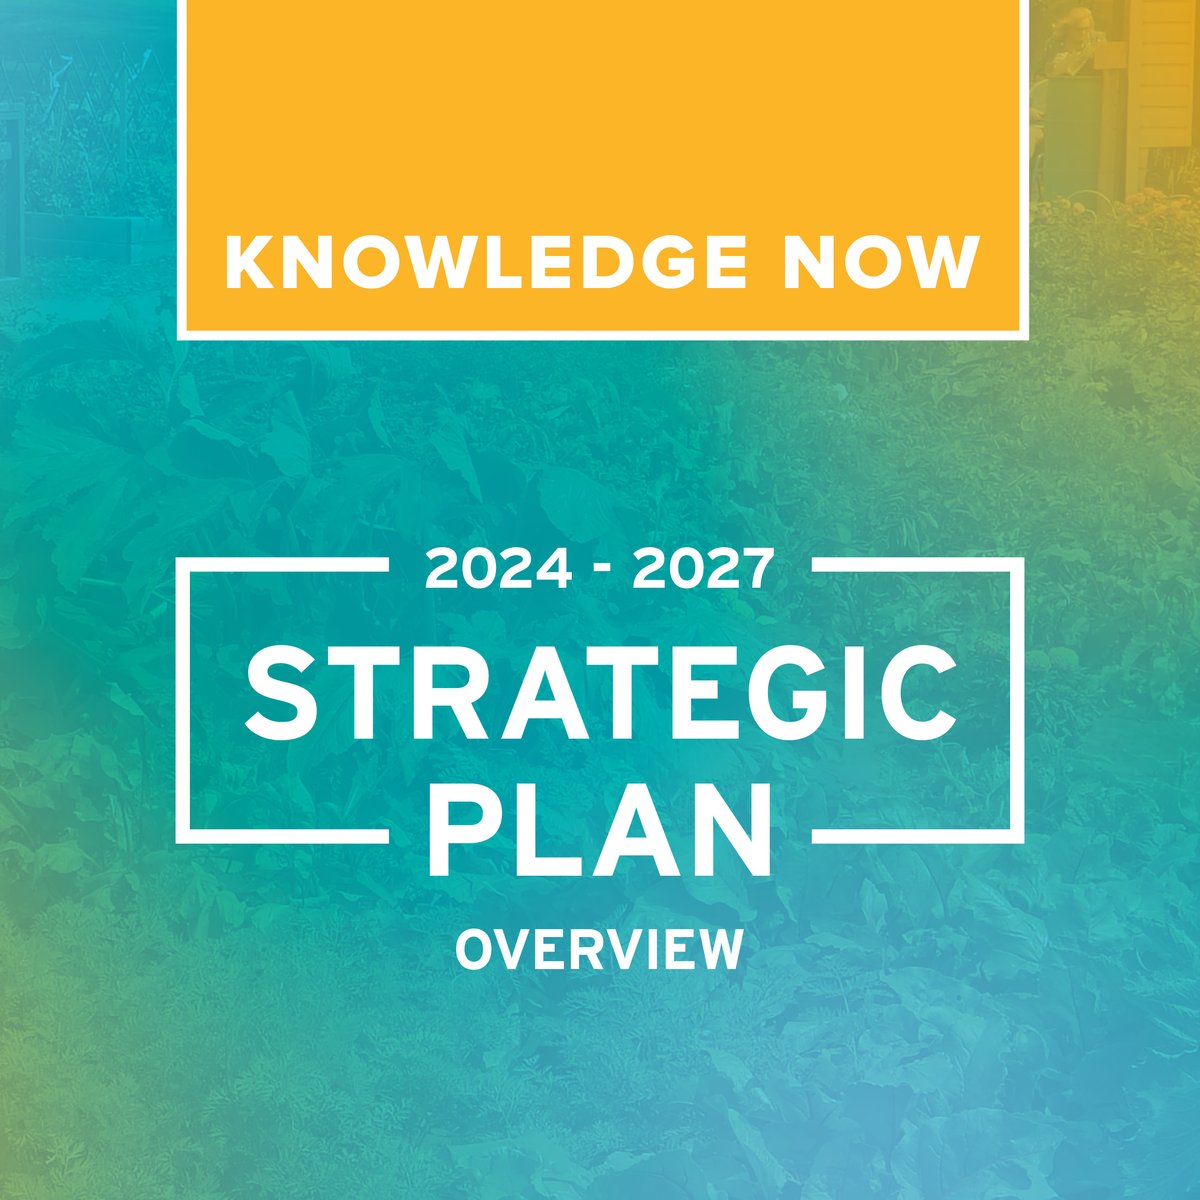 Join RhPAP on May 10 for a special Knowledge Now session detailing our 2024-2027 Strategic Plan.

Register today to join us over Zoom: 

eventbrite.com/e/894708516257…

#Alberta #RuralAlberta #AlbertaHealth